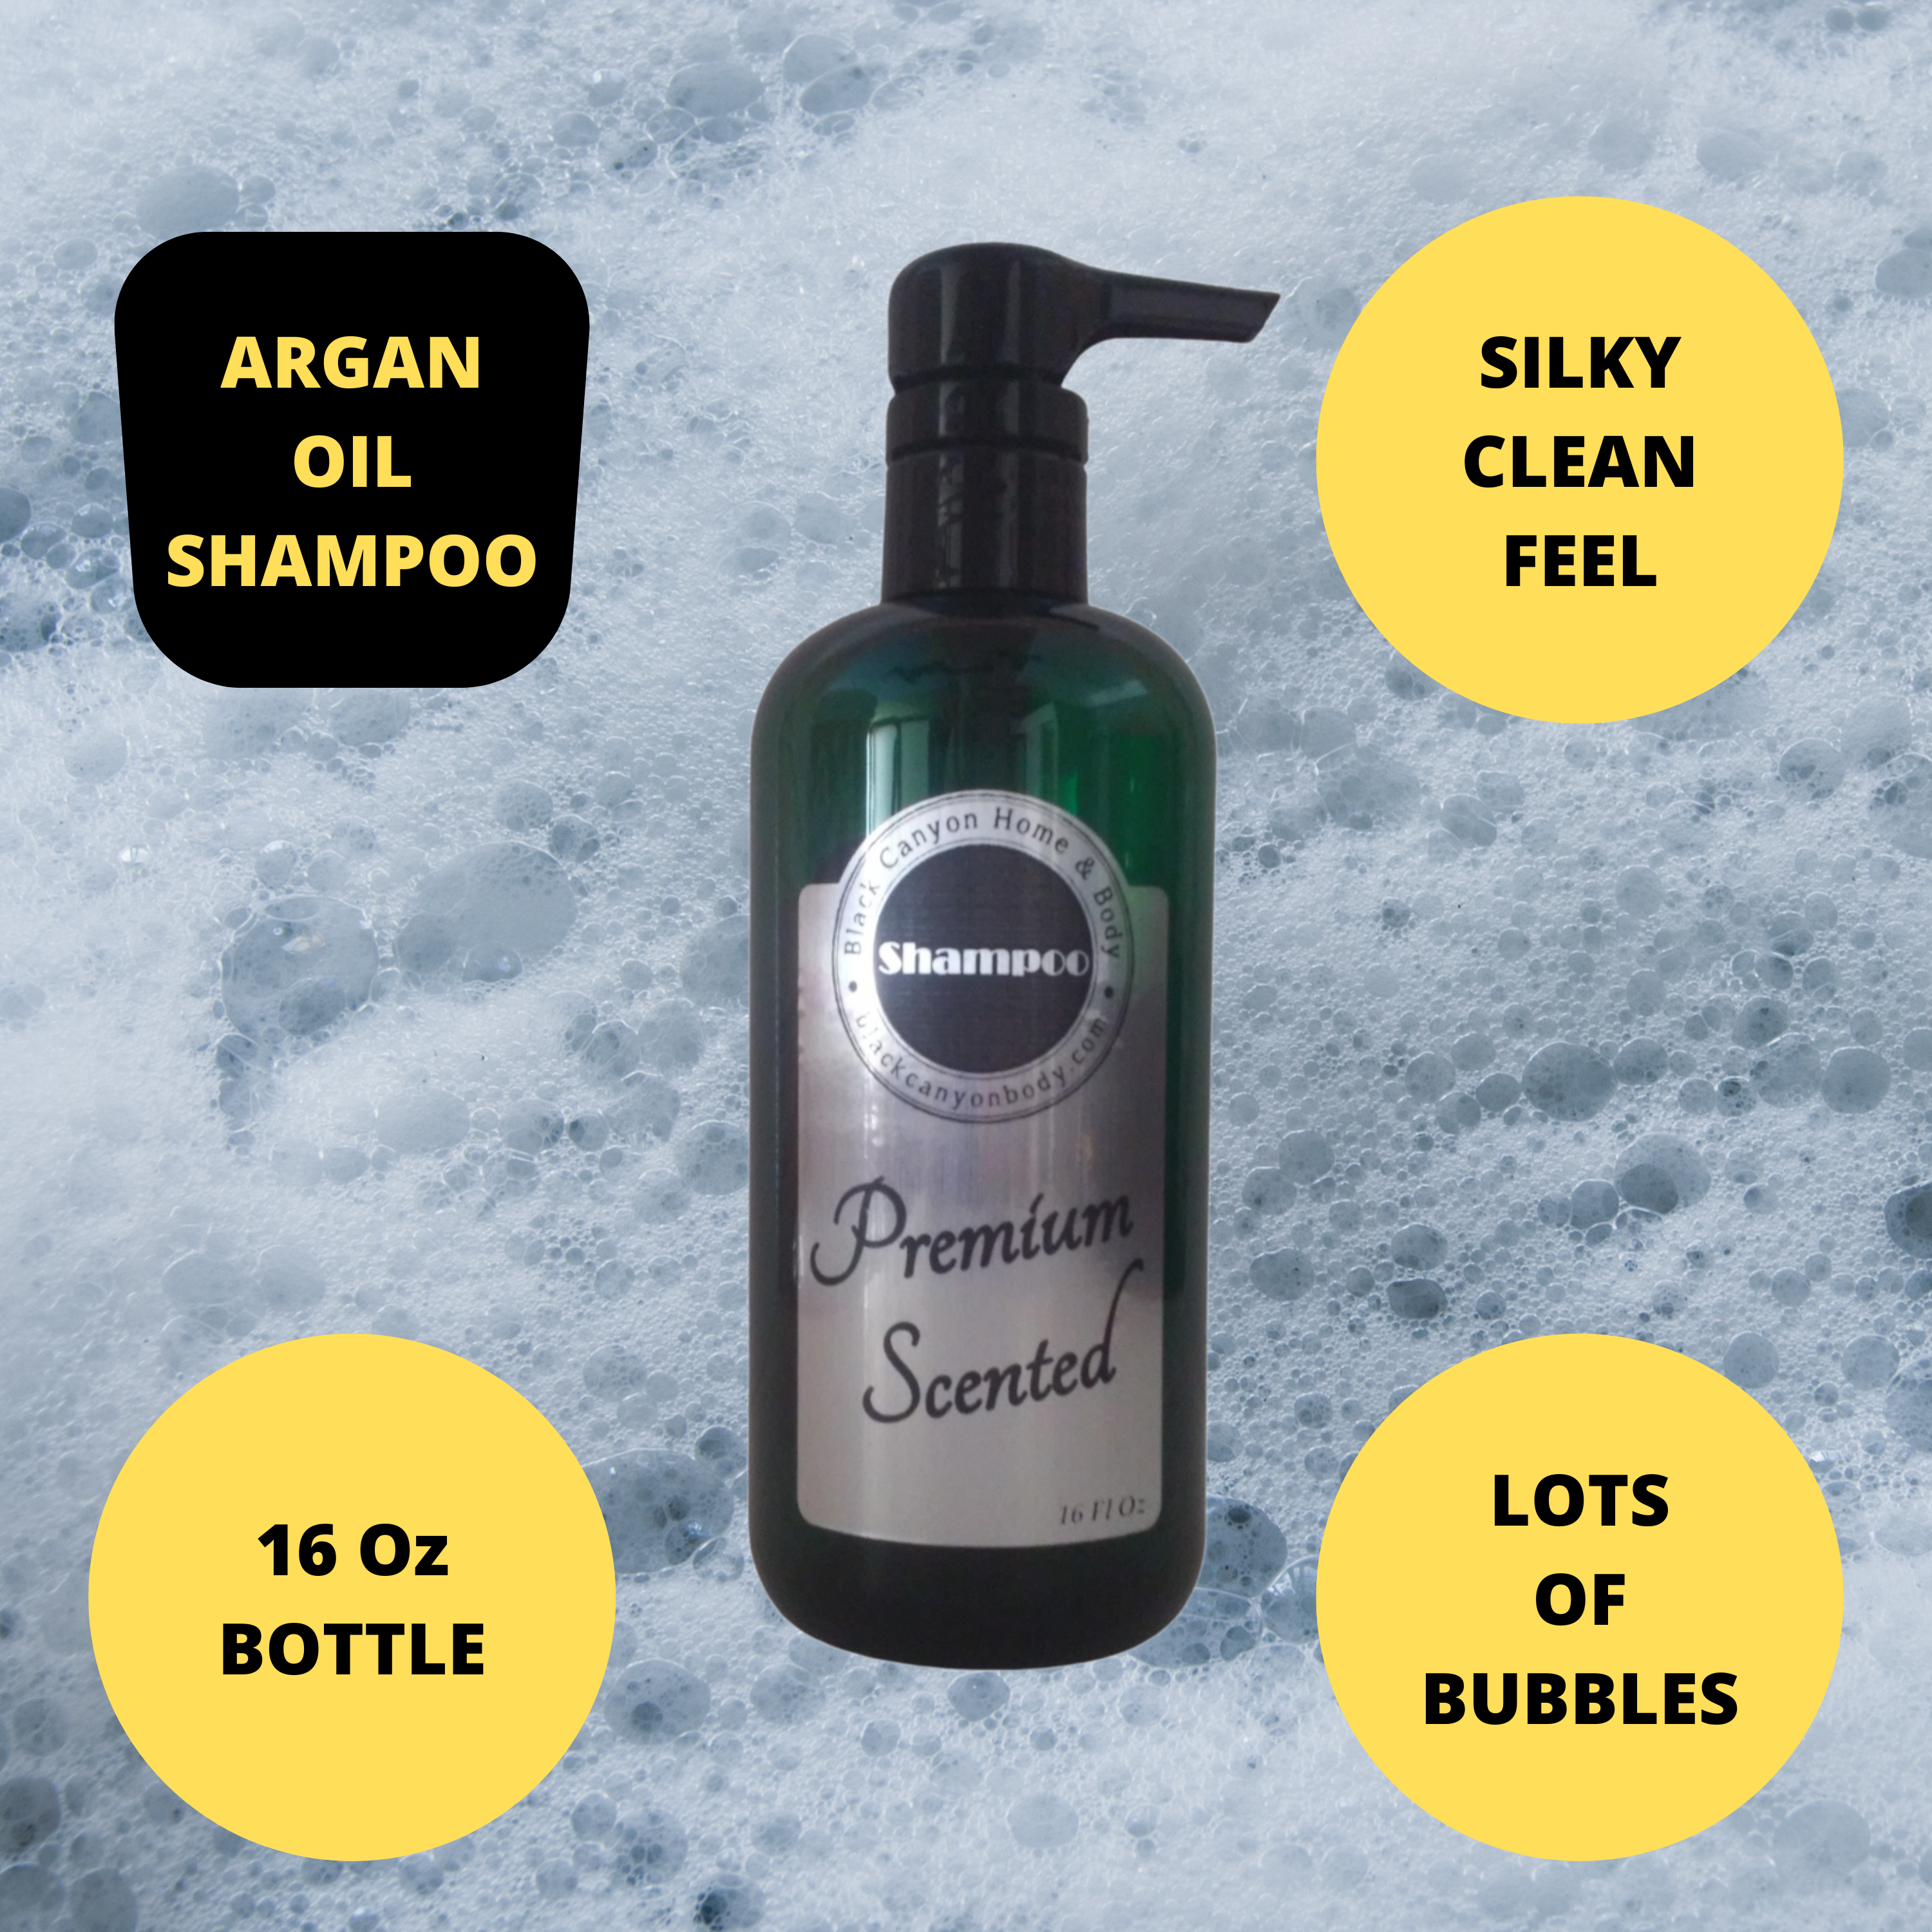 Black Canyon Black Currant & Sandalwood Scented Shampoo with Argan Oil